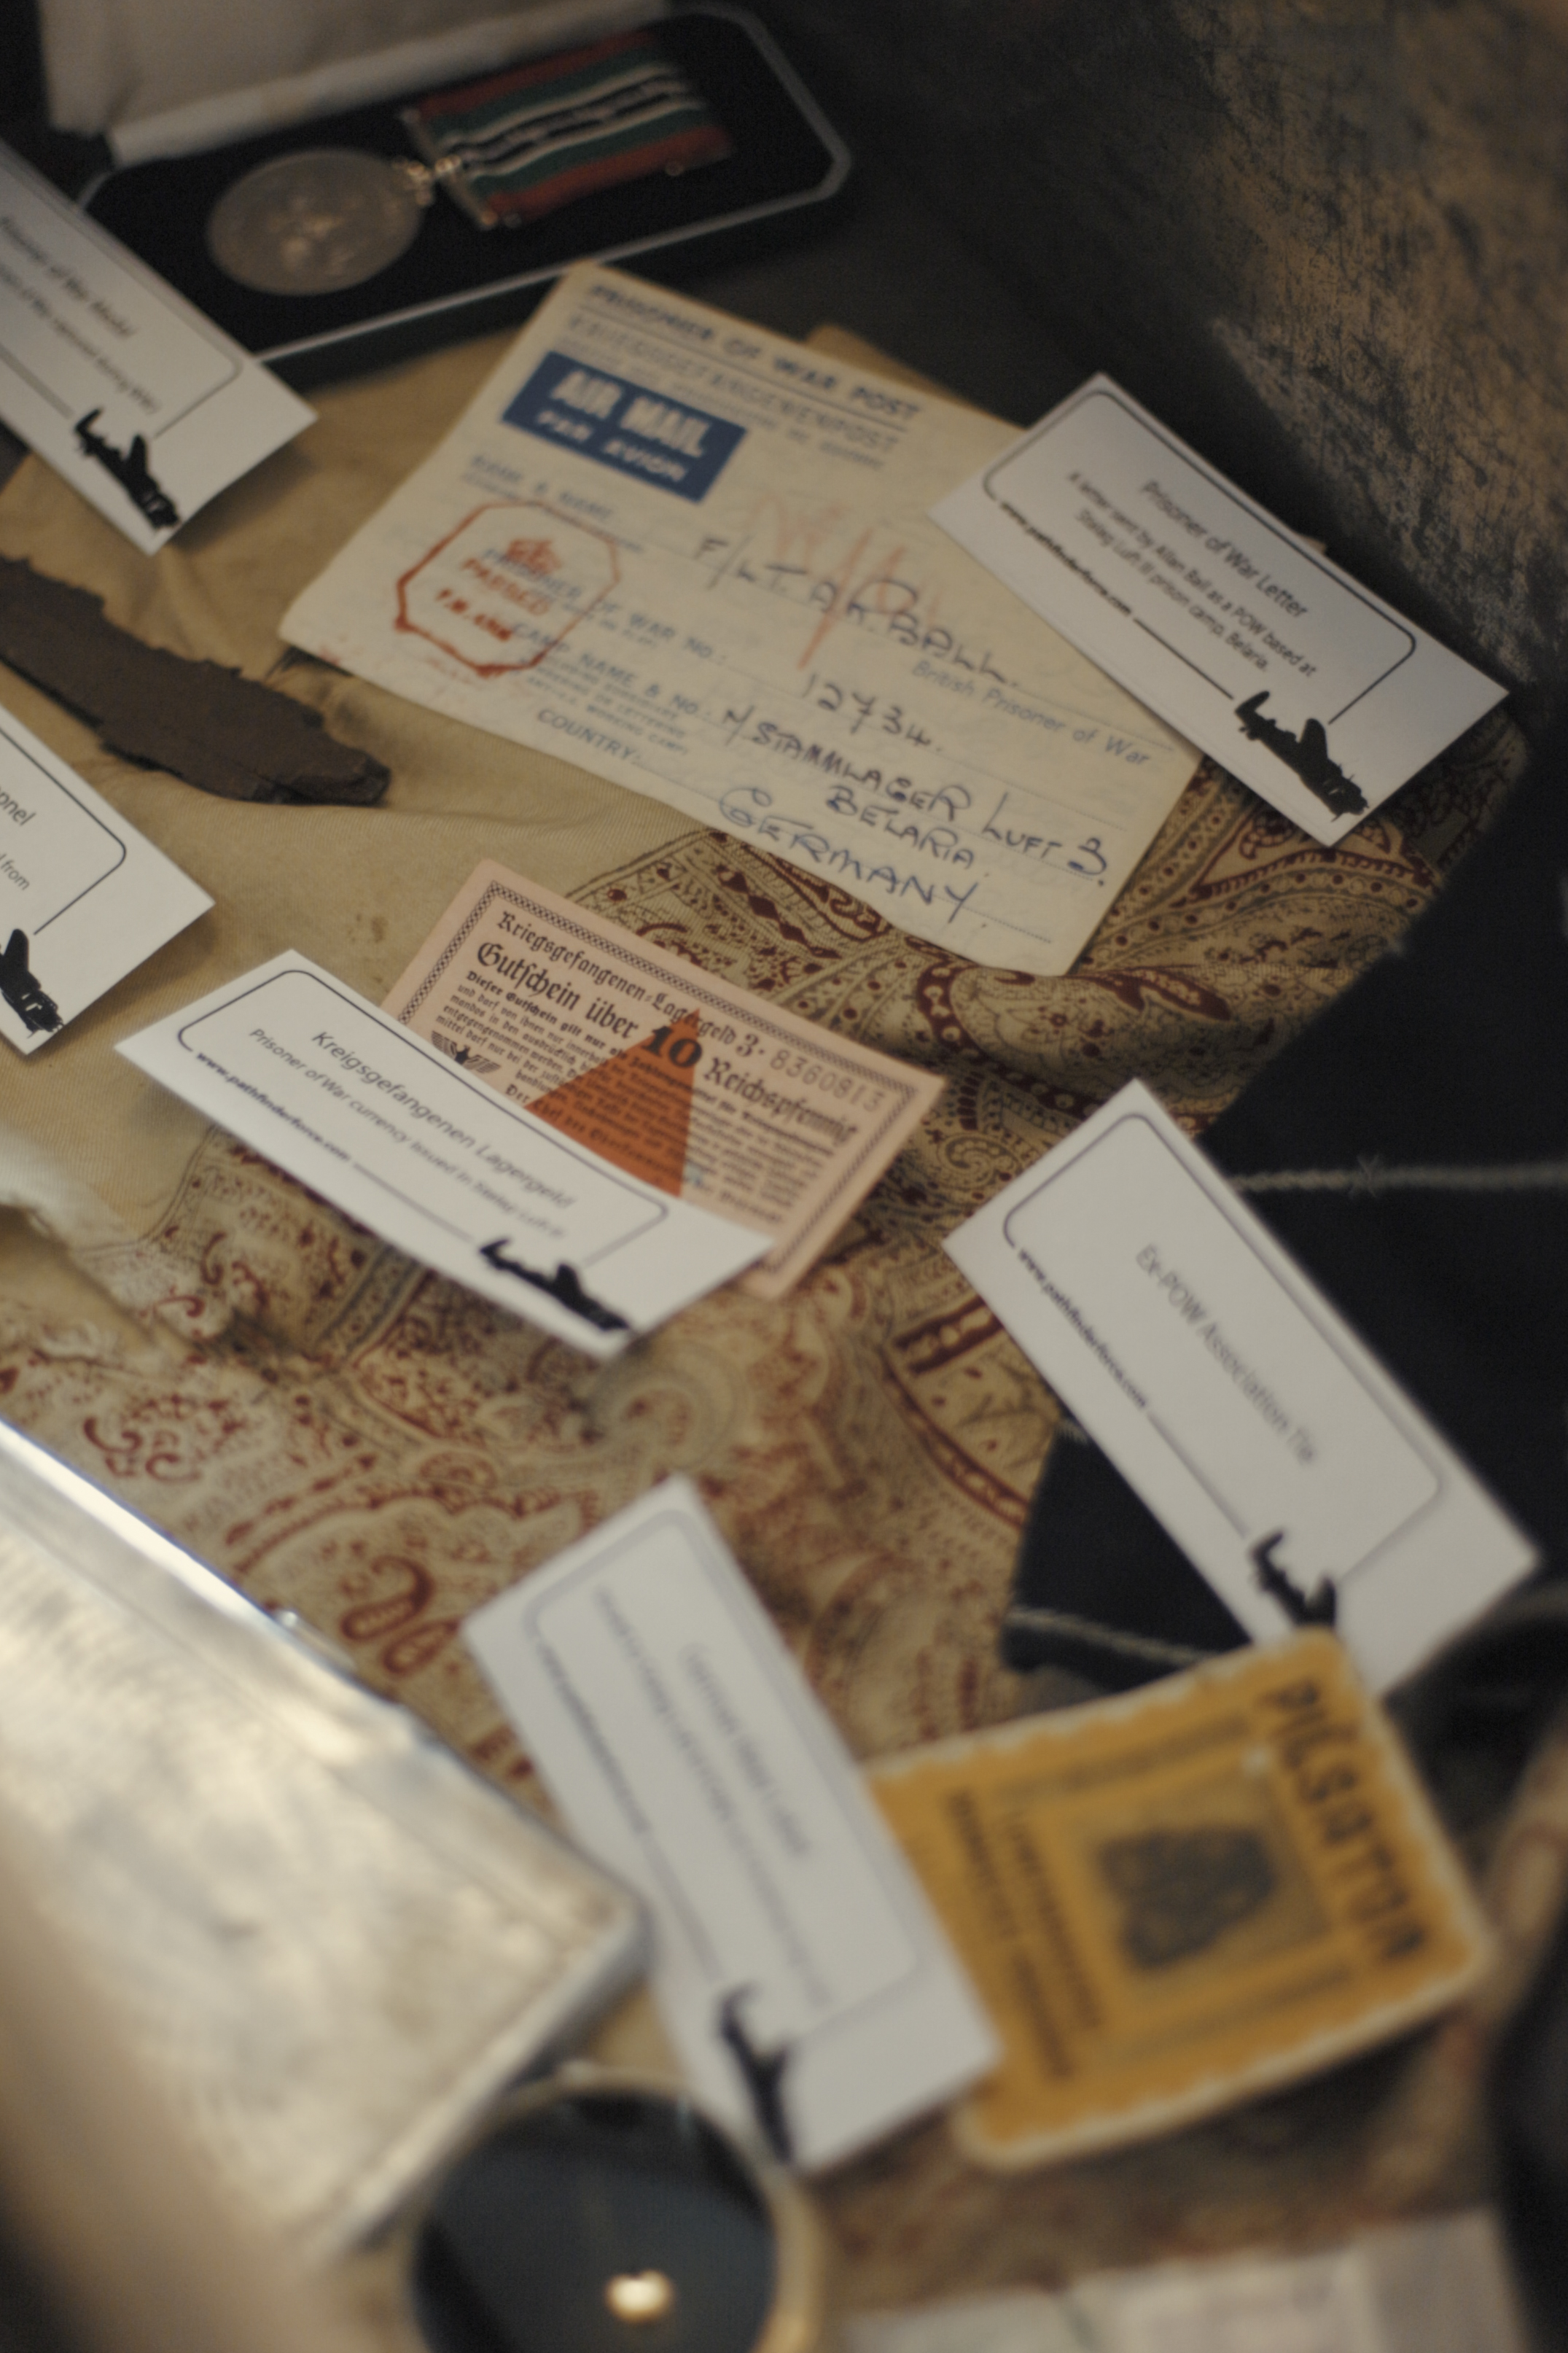 Image shows paper cards and letters with writing on them.